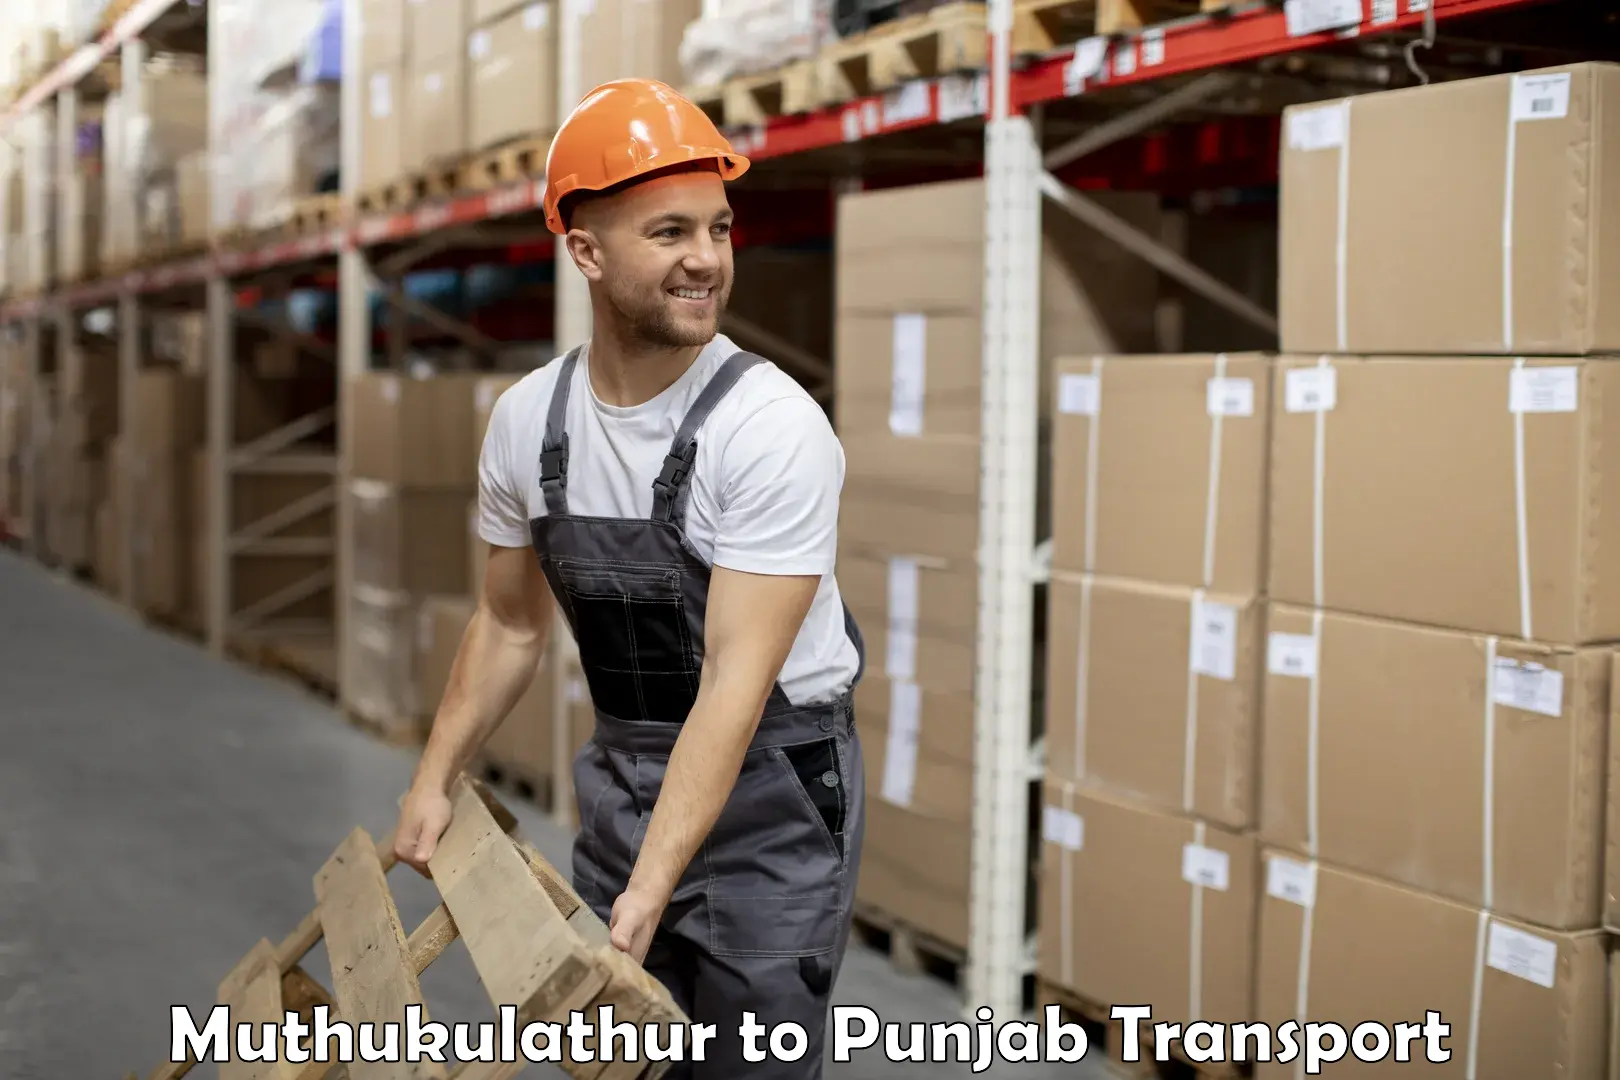 Truck transport companies in India in Muthukulathur to Punjab